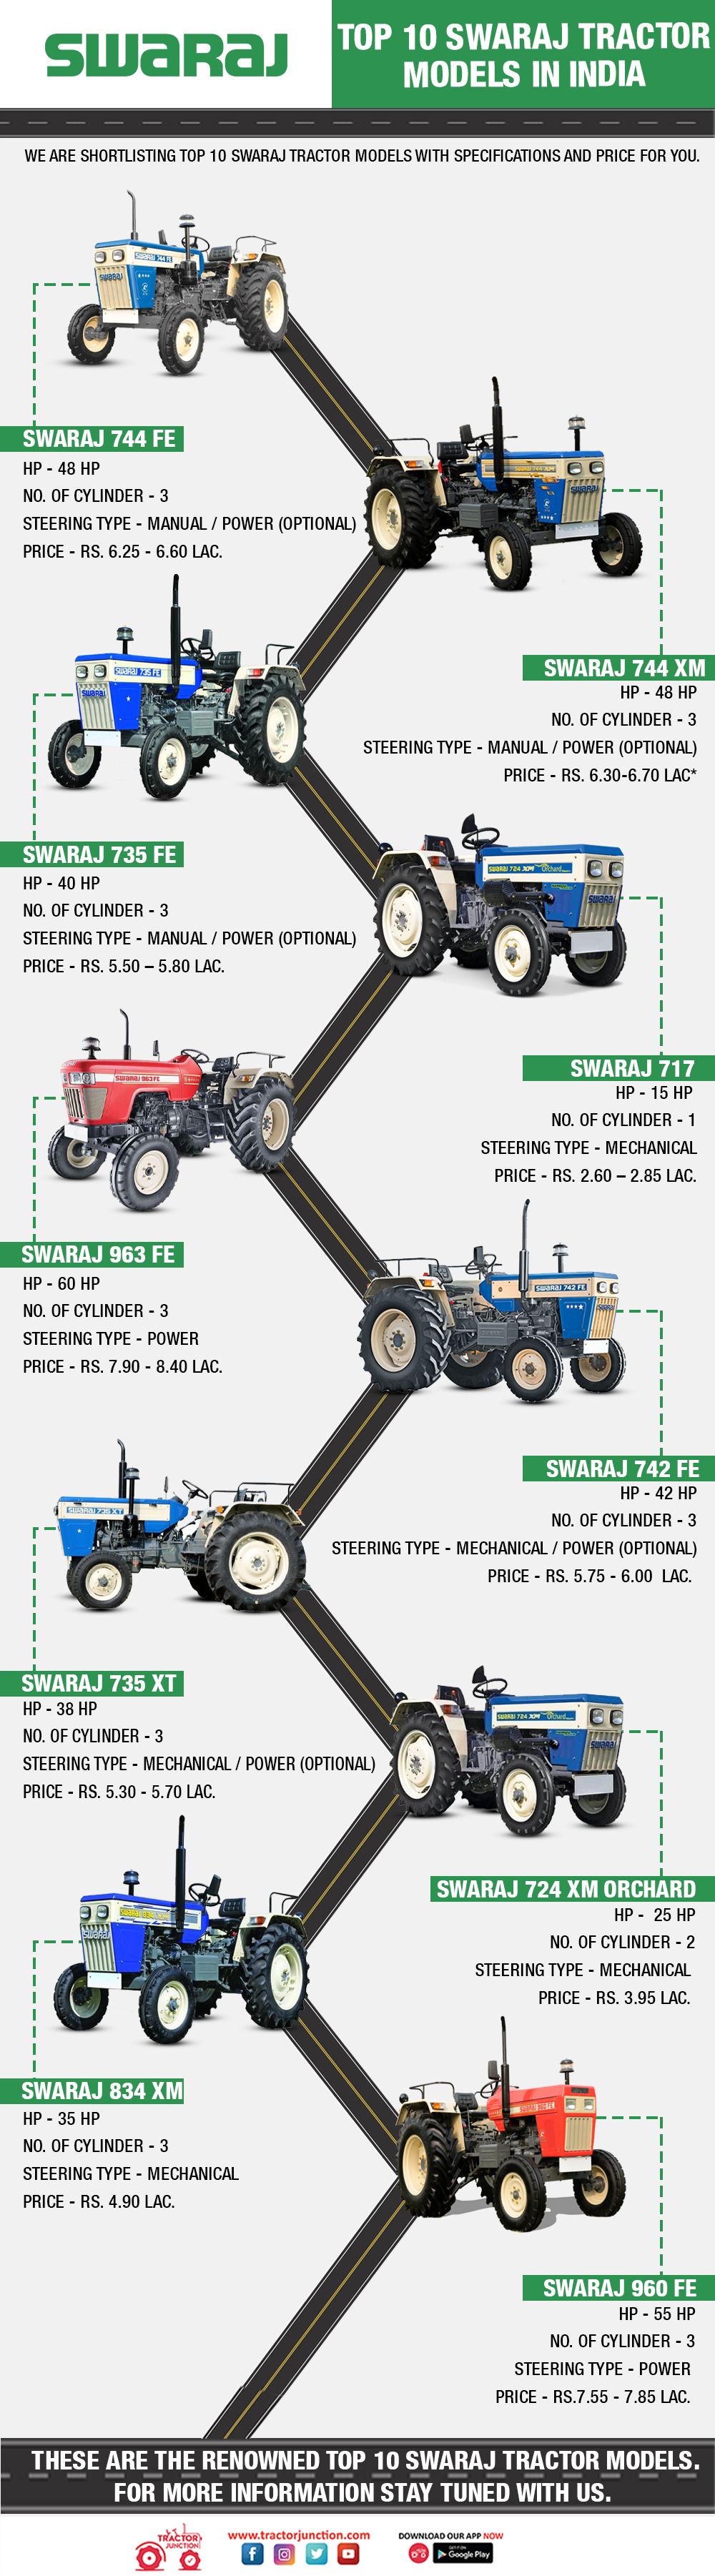 Top 10 Swaraj Tractor Models in India - Infographic 